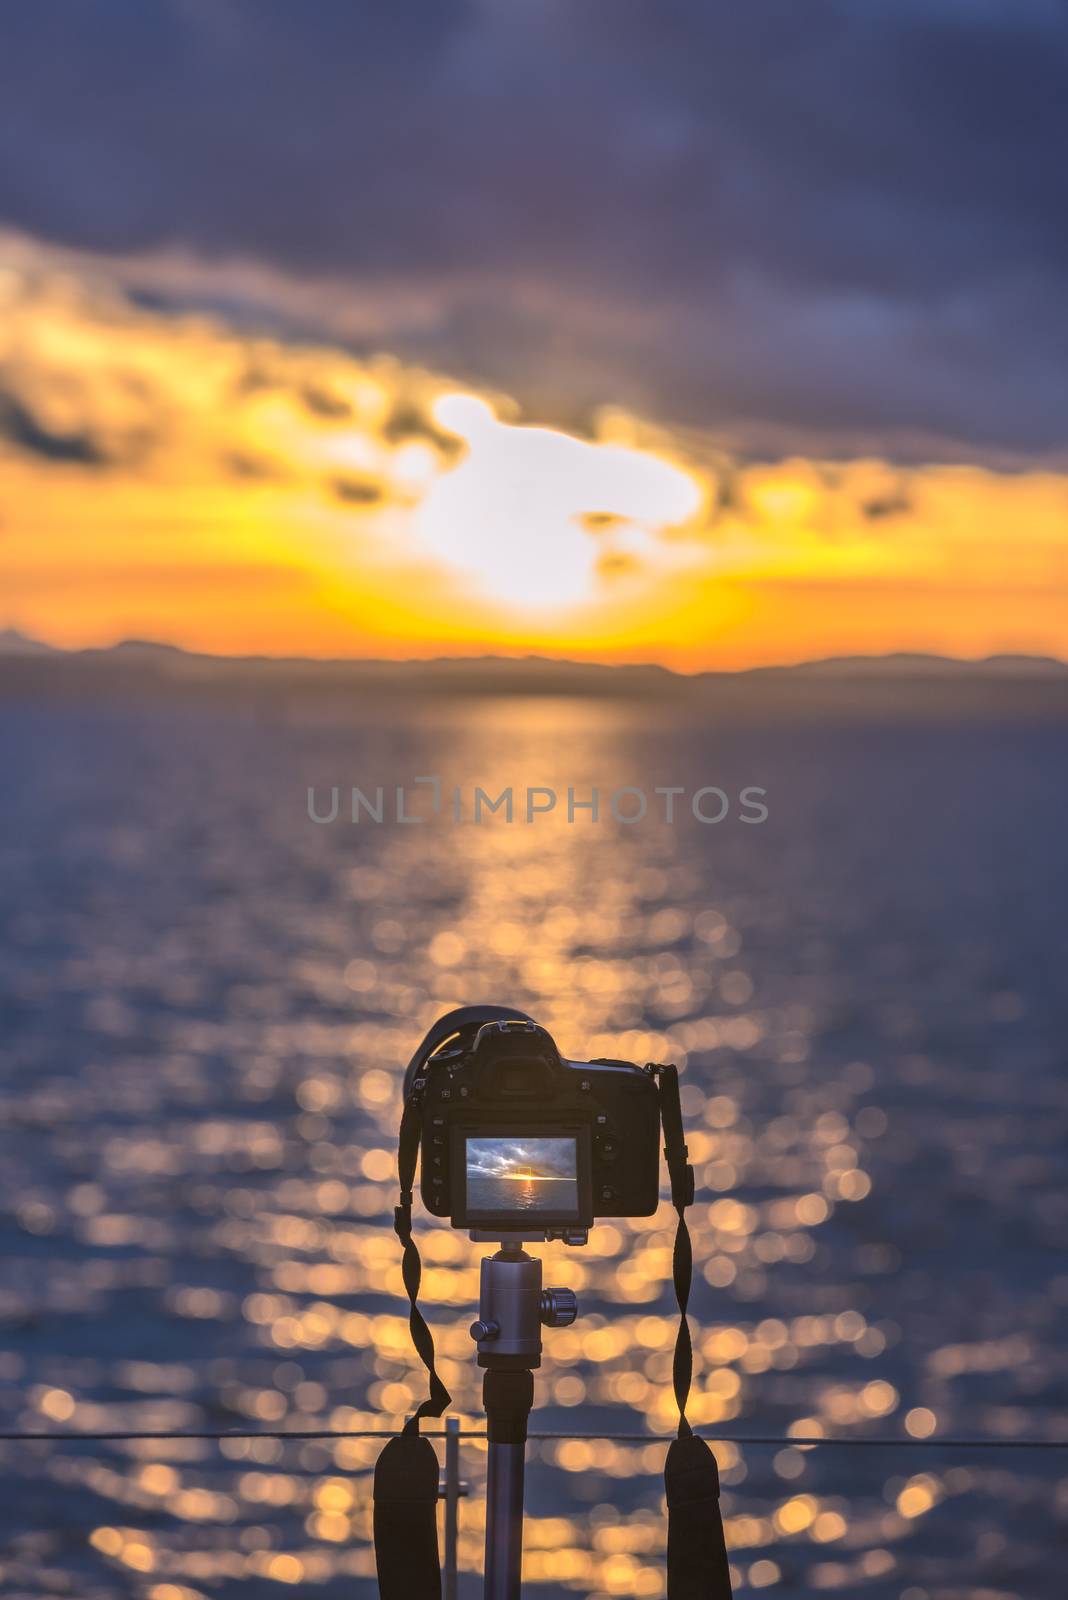 Colorful image with a DSLR camera on a tripod capturing, in live view mode, a beautiful sunset over the water.